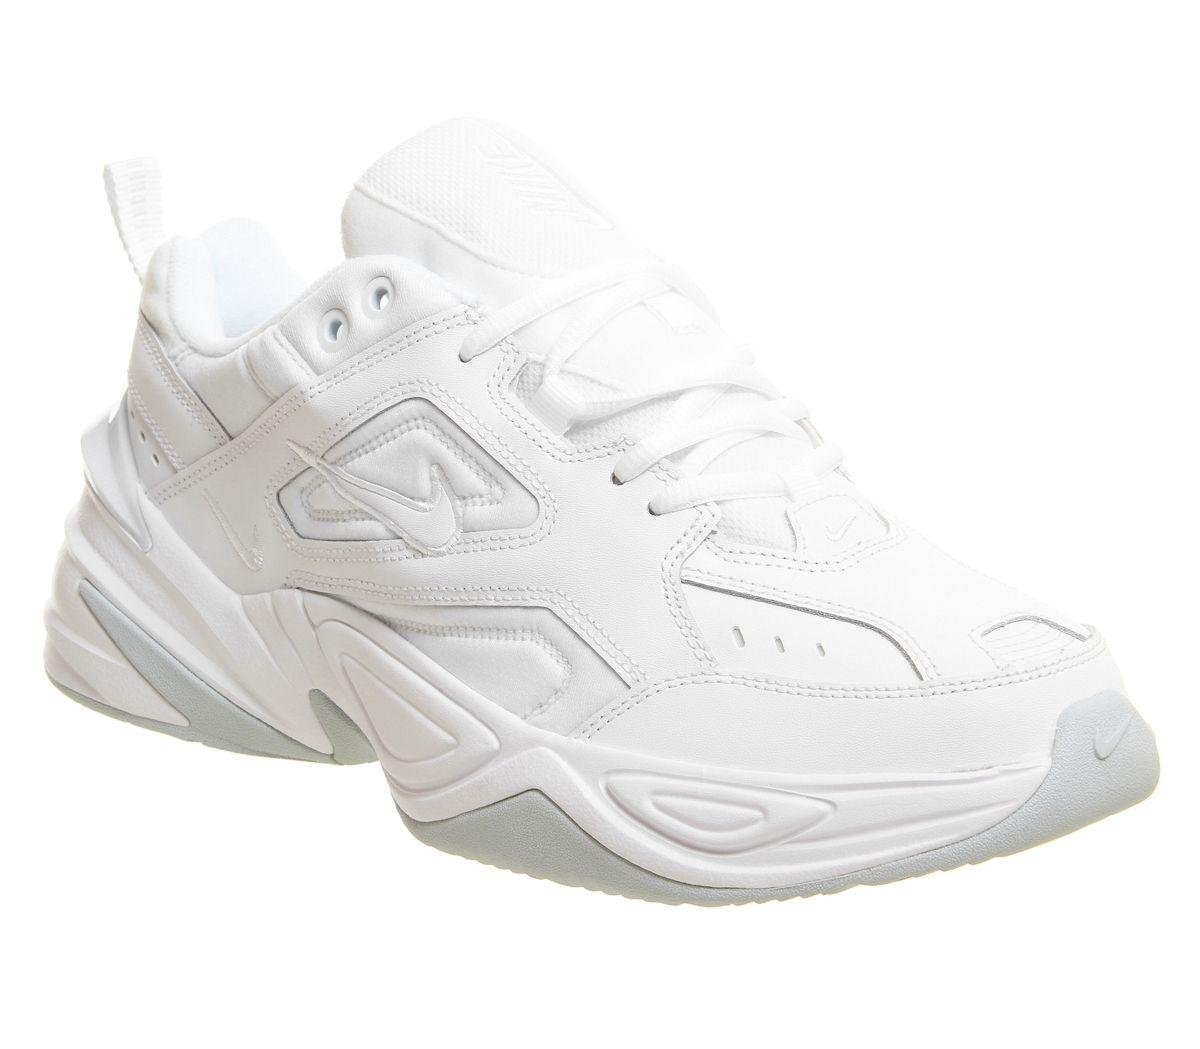 Nike Leather M2k Tekno Trainers in 